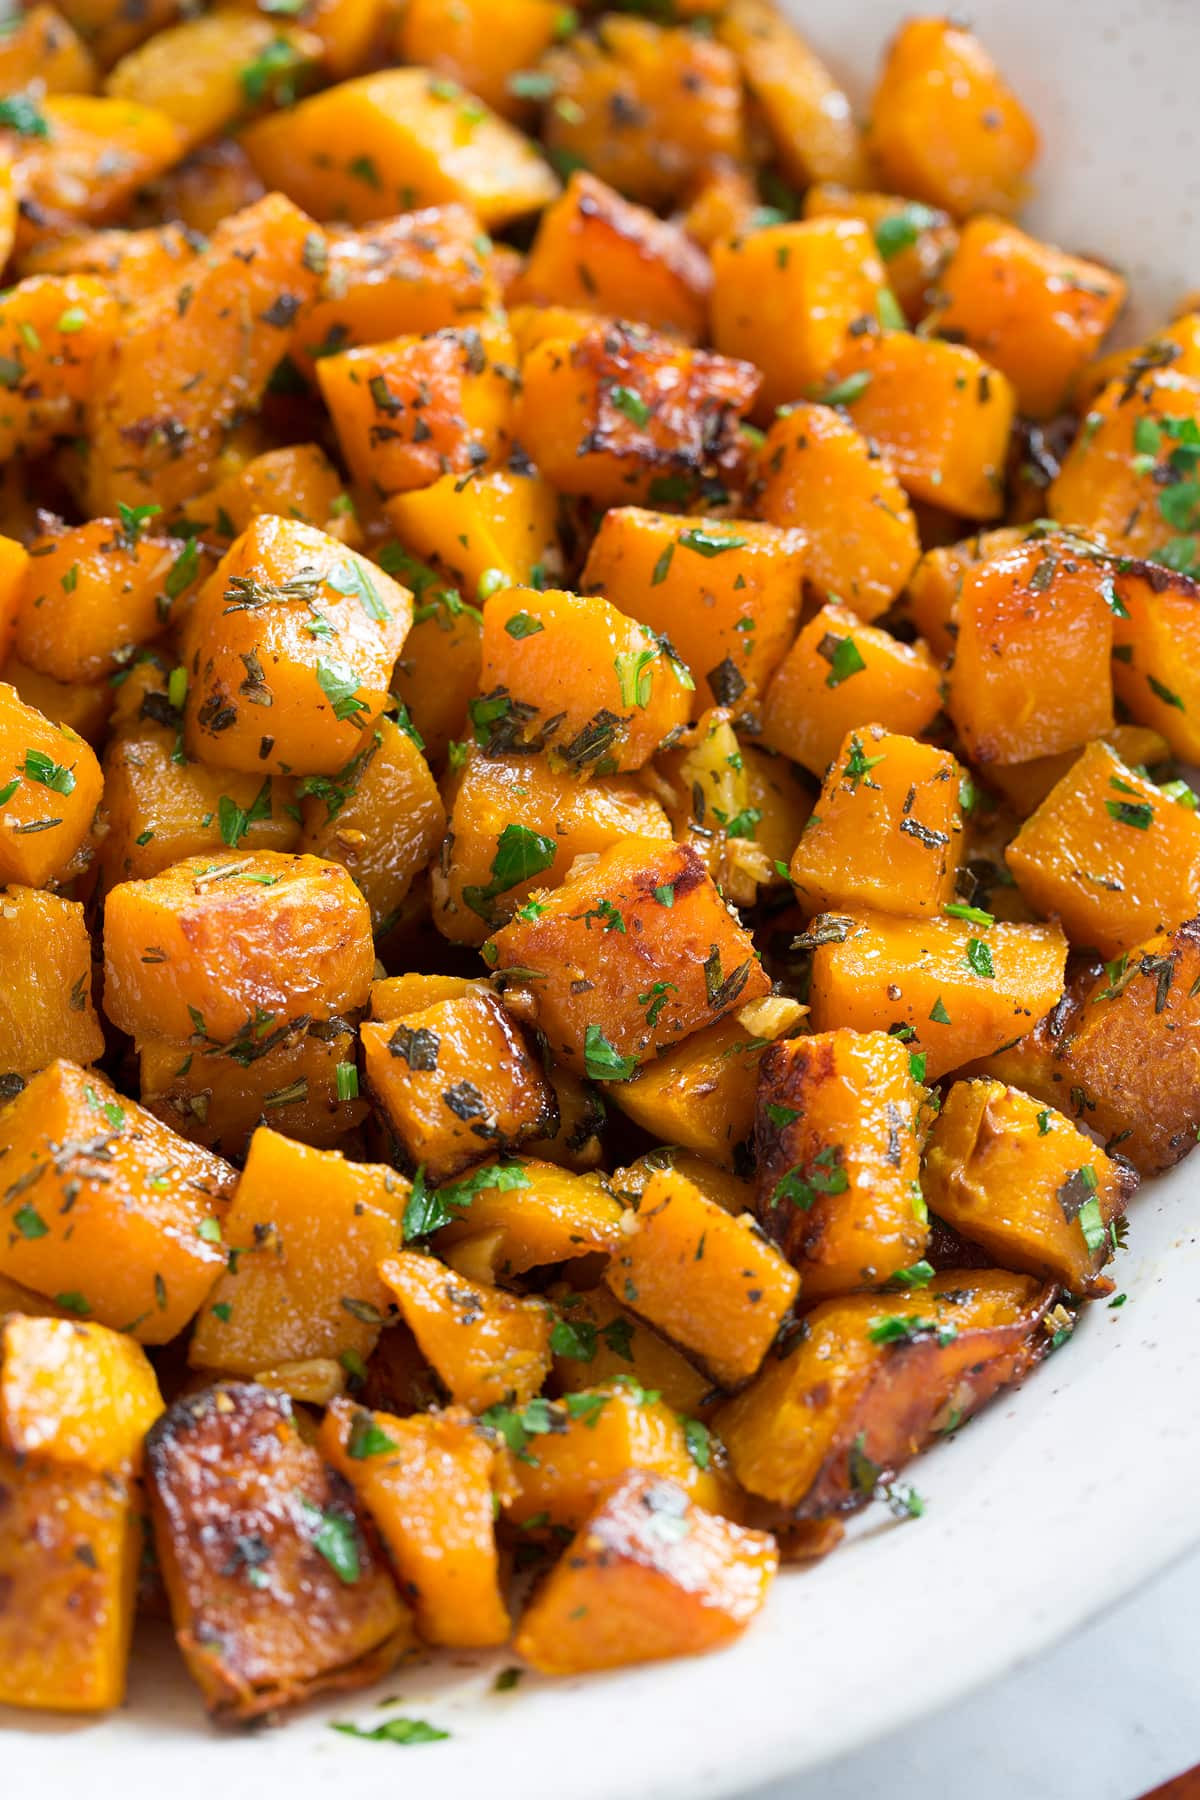 Baking butternut Squash Best Of Roasted butternut Squash with Garlic and Herbs Cooking